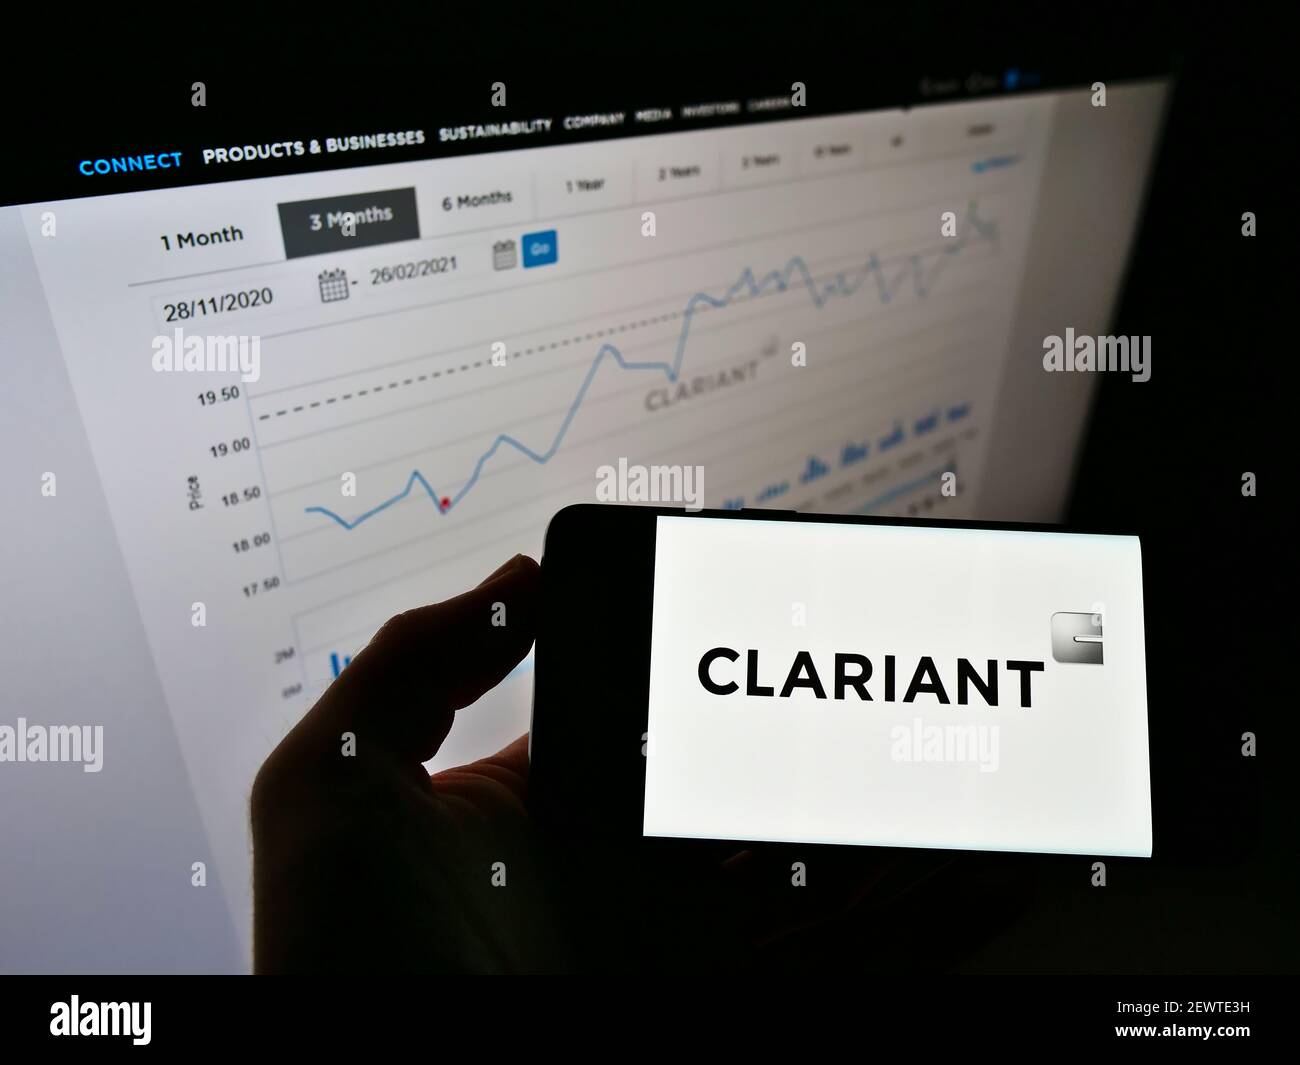 Person holding cellphone with logo of Swiss specialty chemicals company Clariant AG on screen in front of website with chart. Focus on phone display. Stock Photo